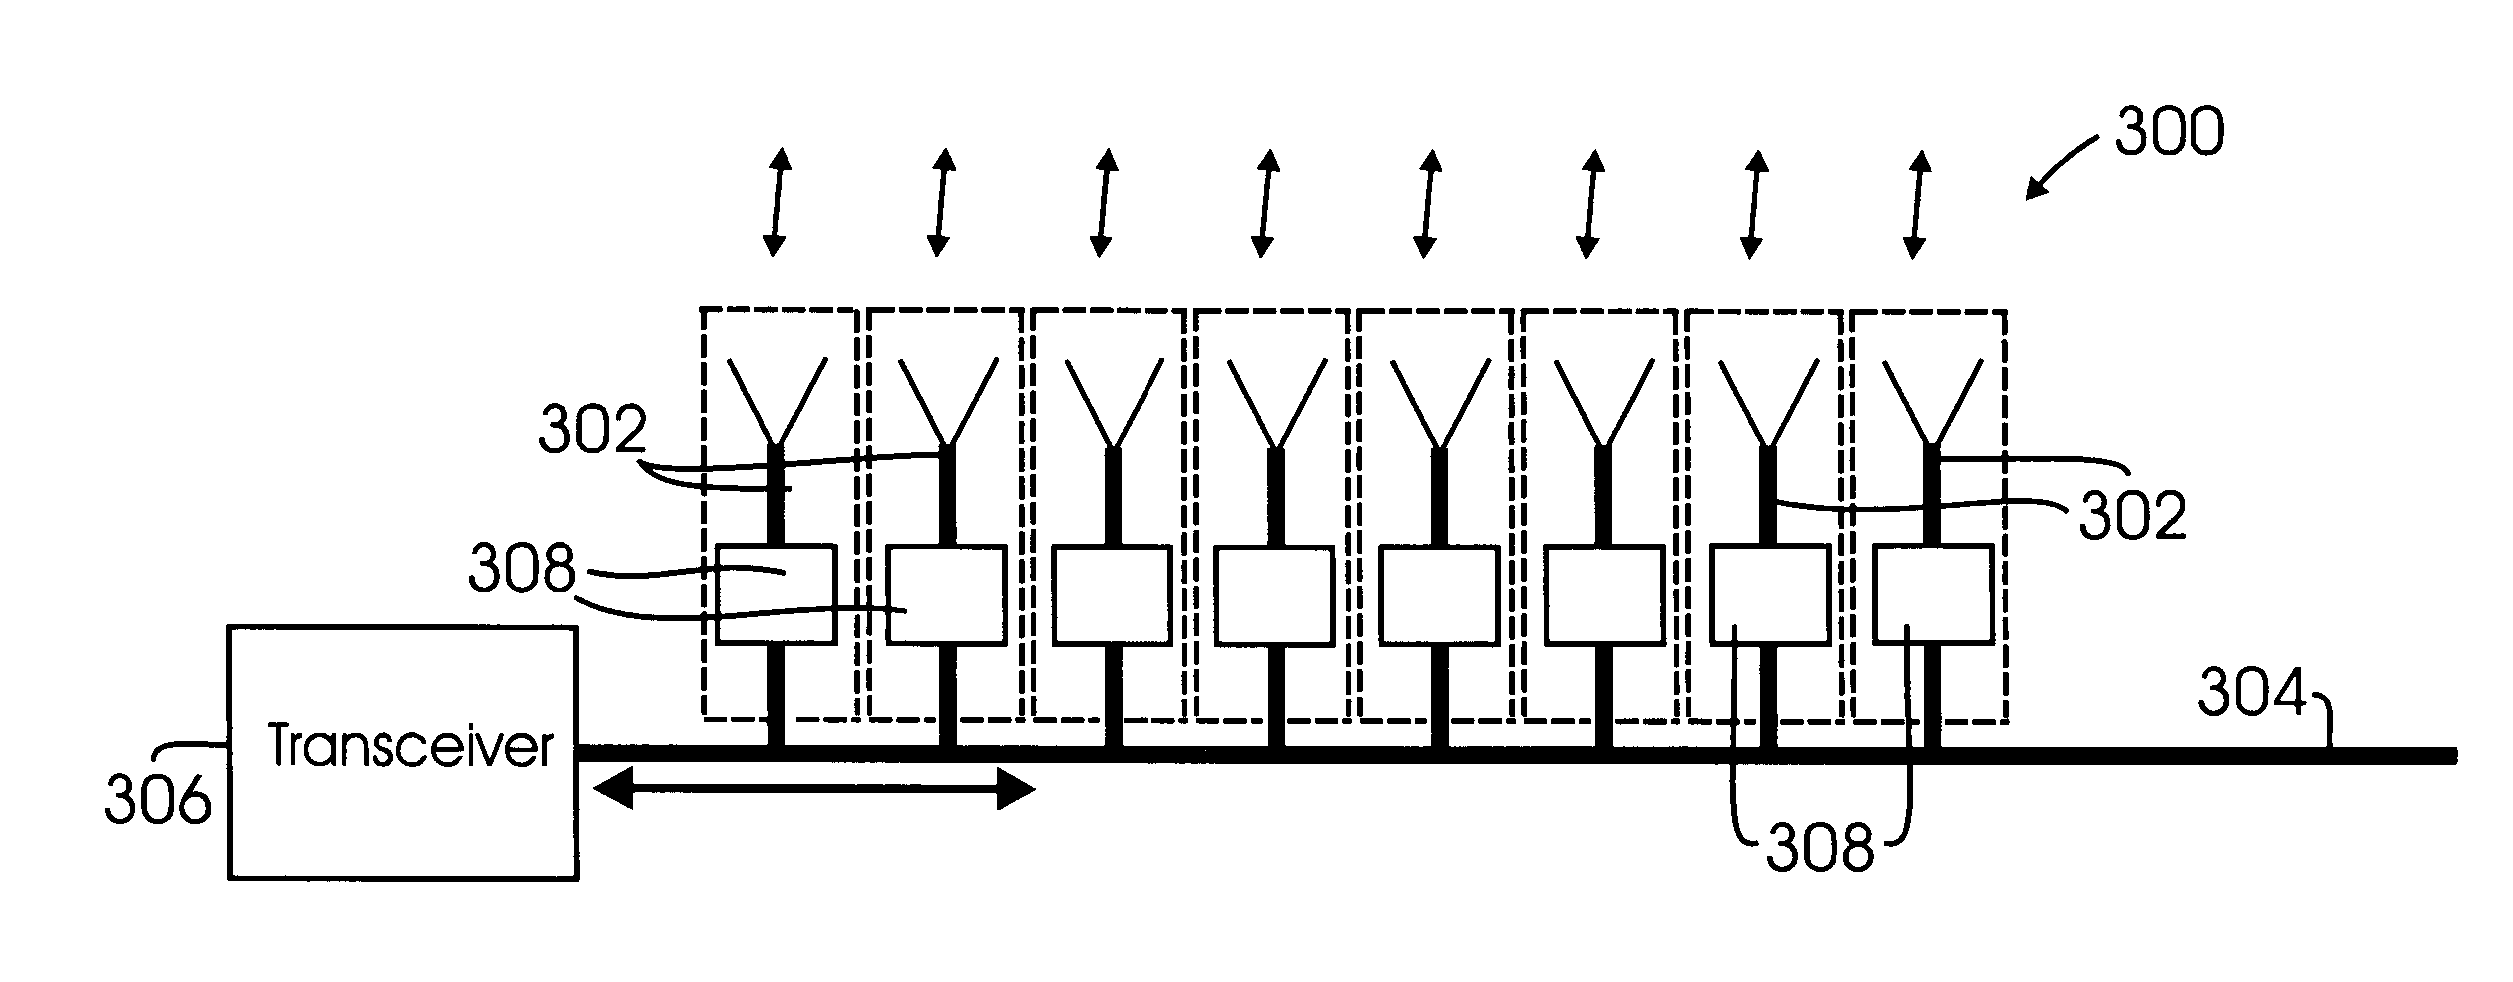 Beam-forming antenna with amplitude-controlled antenna elements